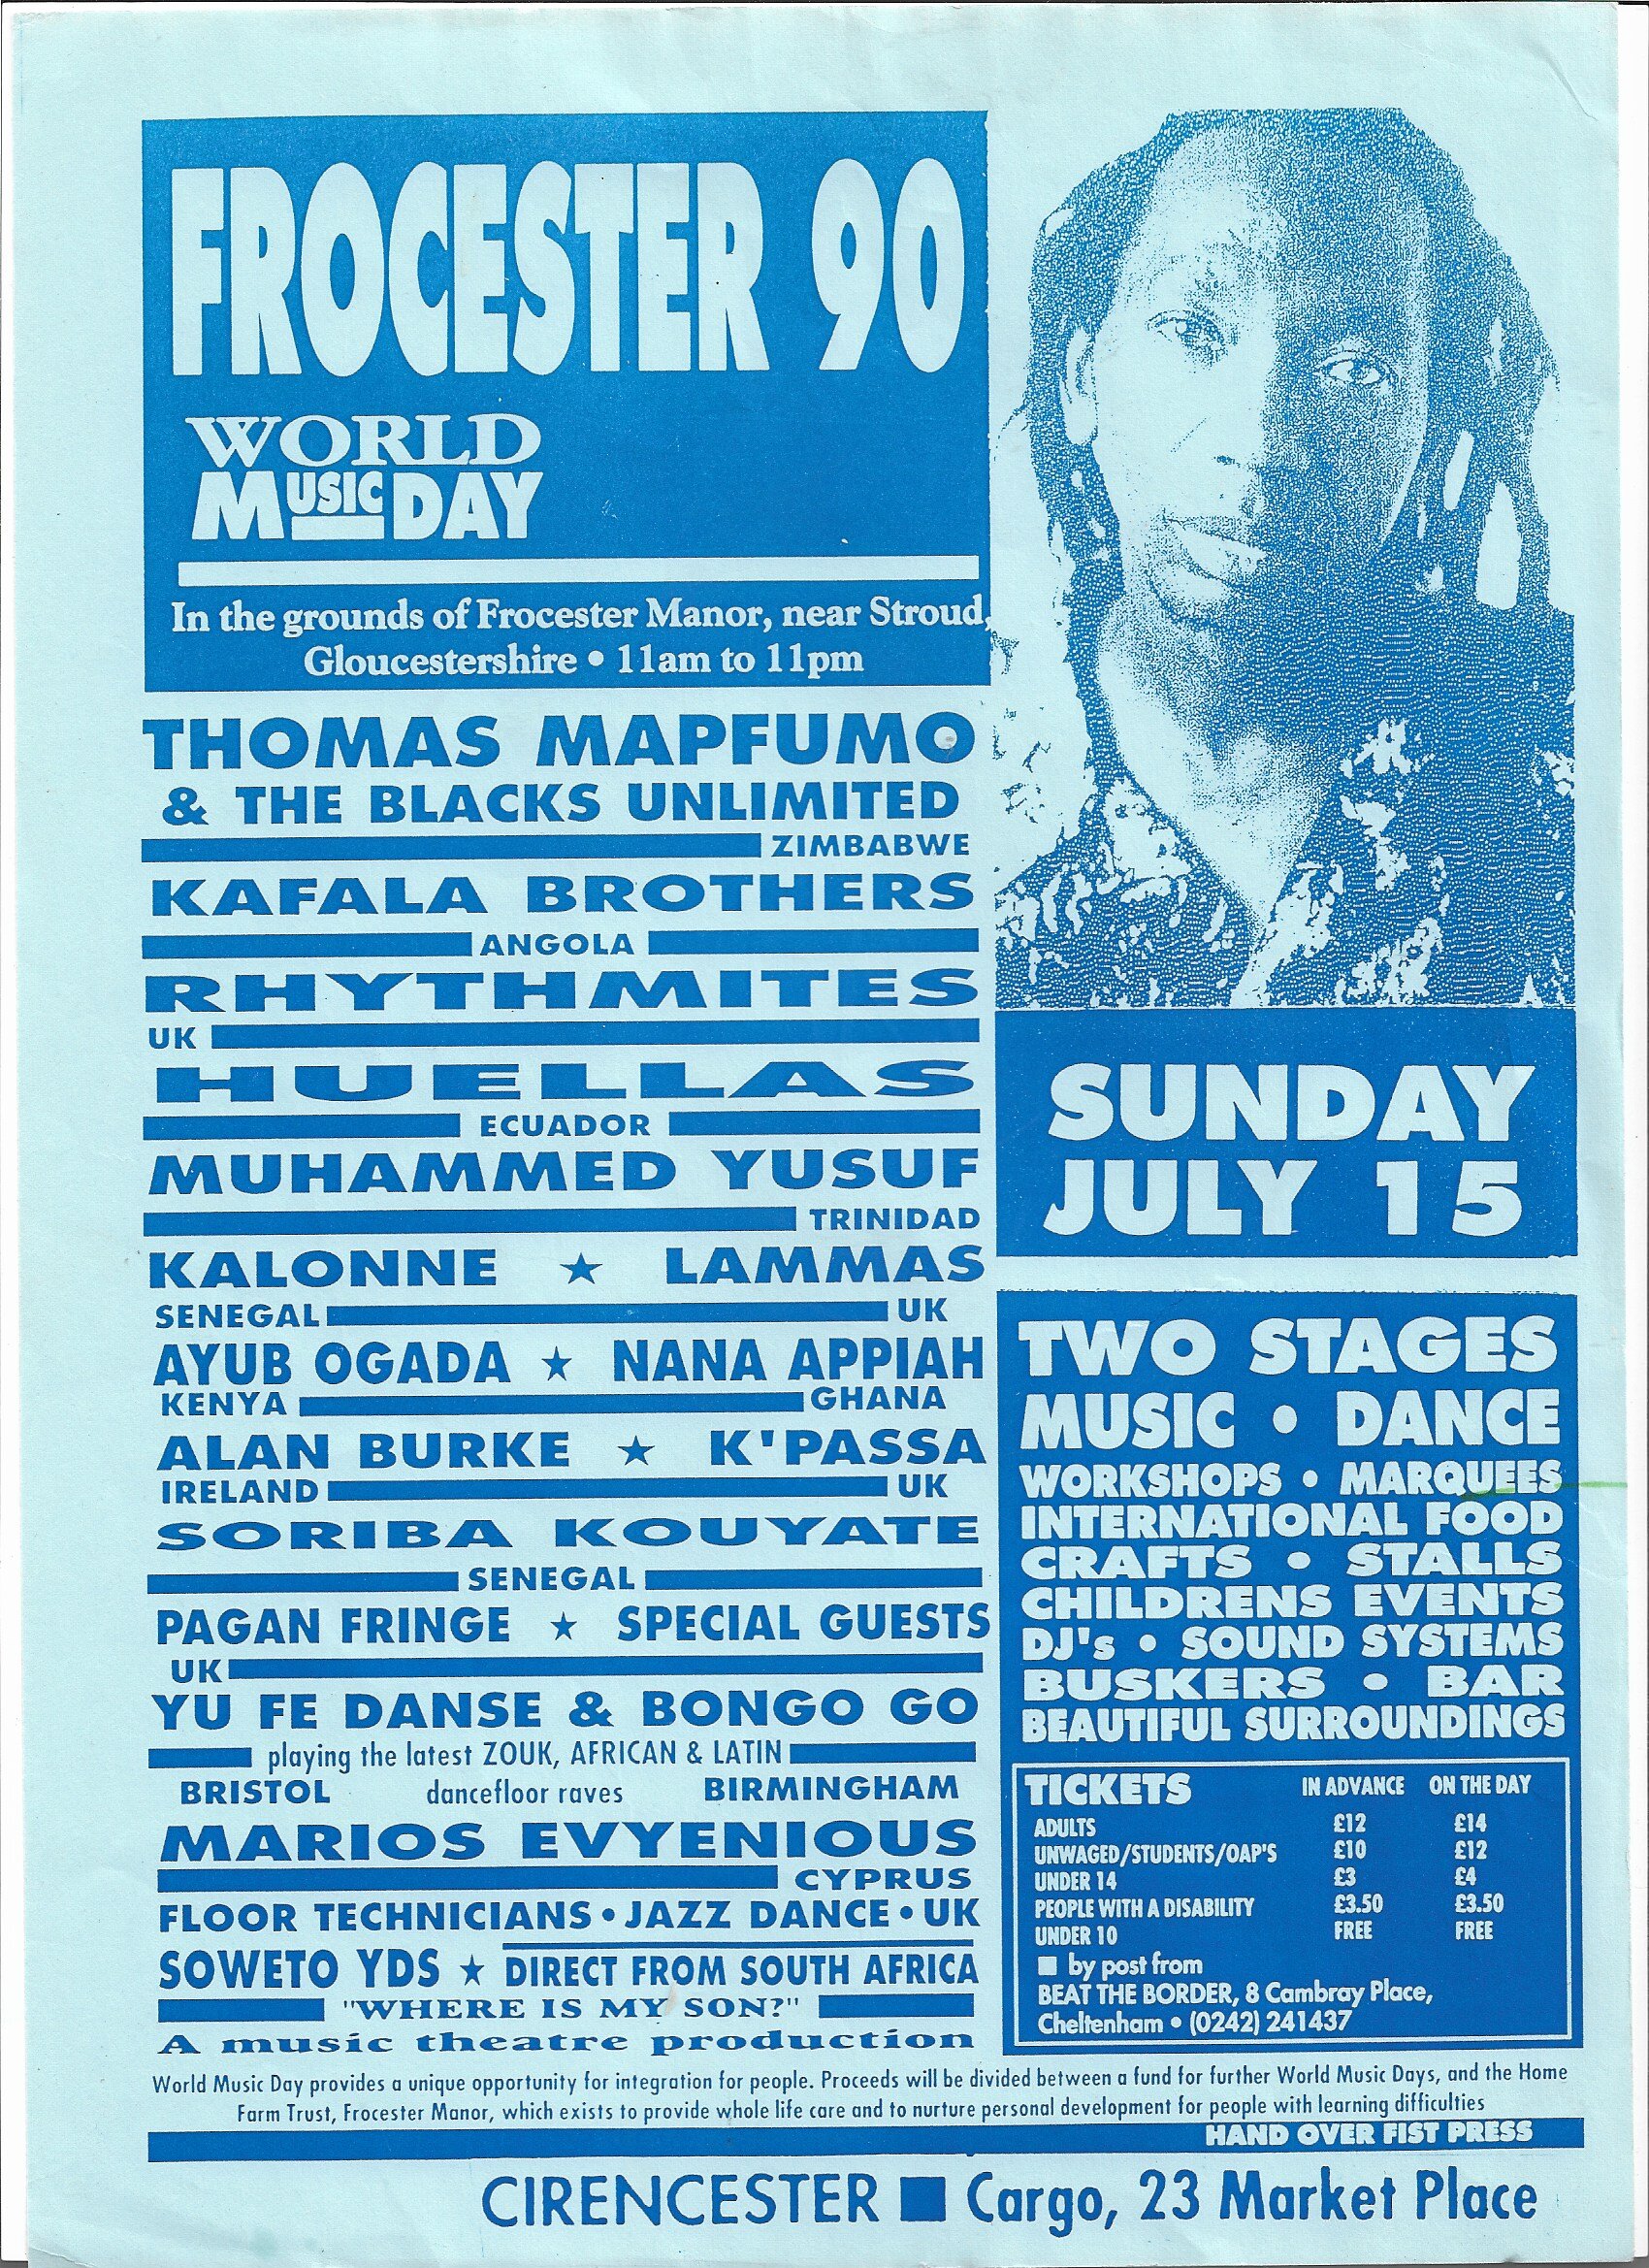 Frocester 90 Poster.jpg